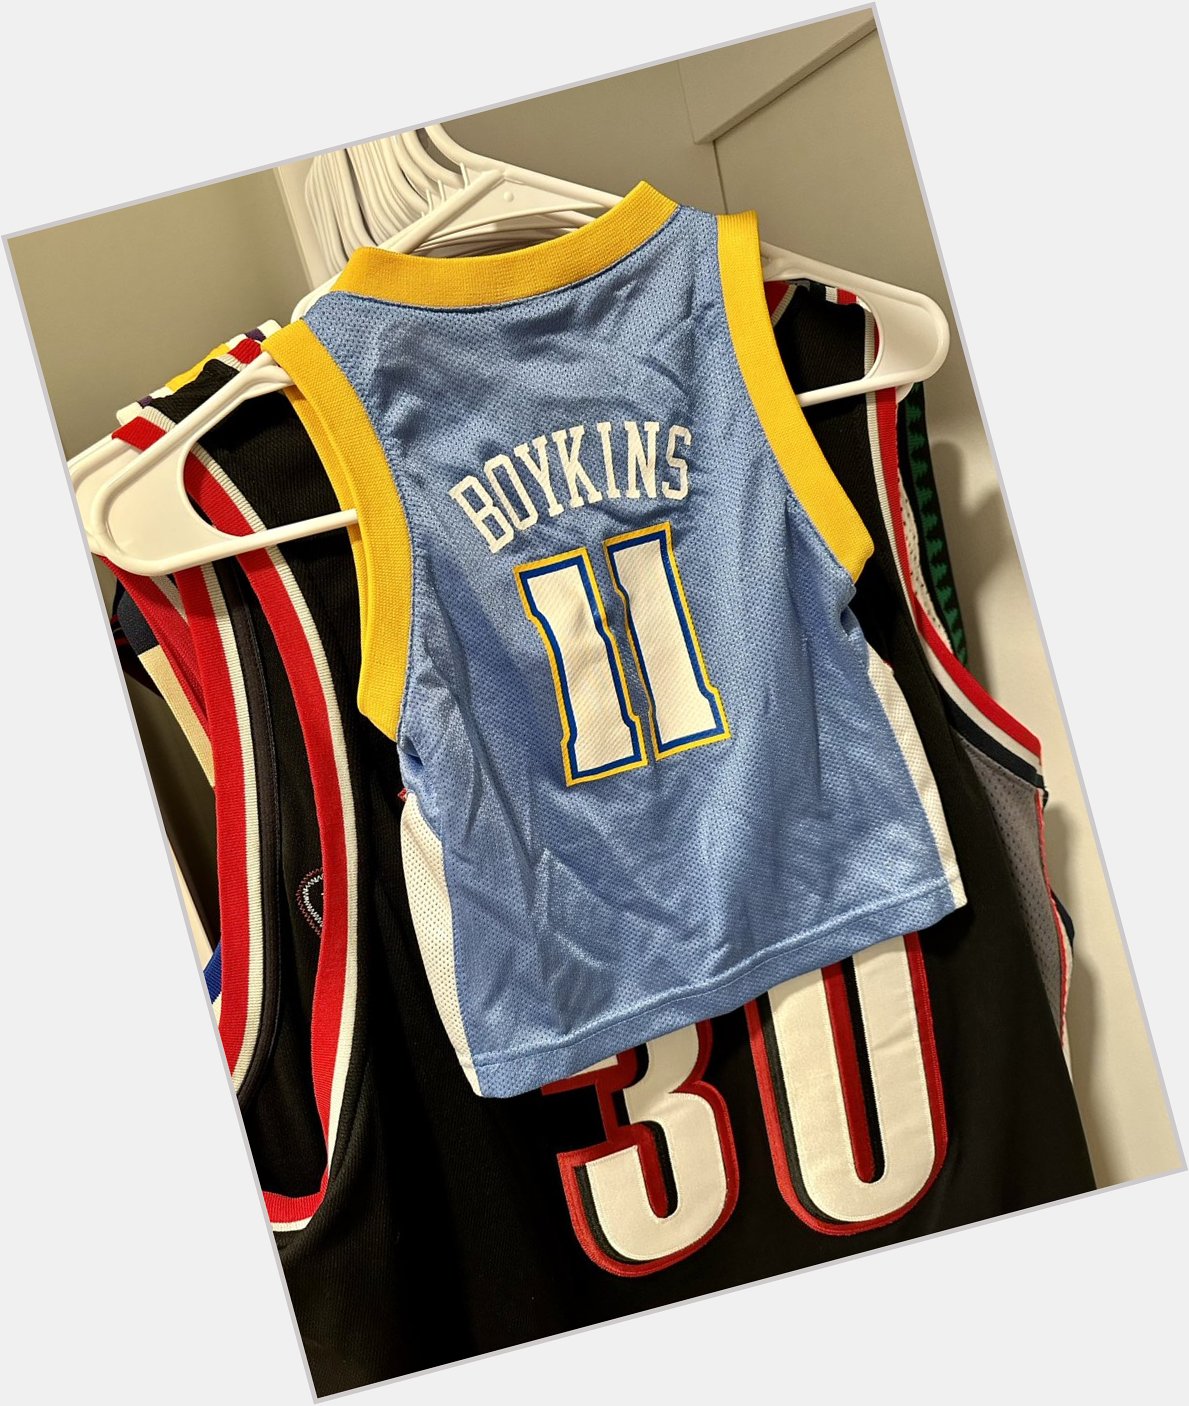 Happy Birthday to the great Earl Boykins! His game-worn Nuggets jersey is one of my most prized possessions 